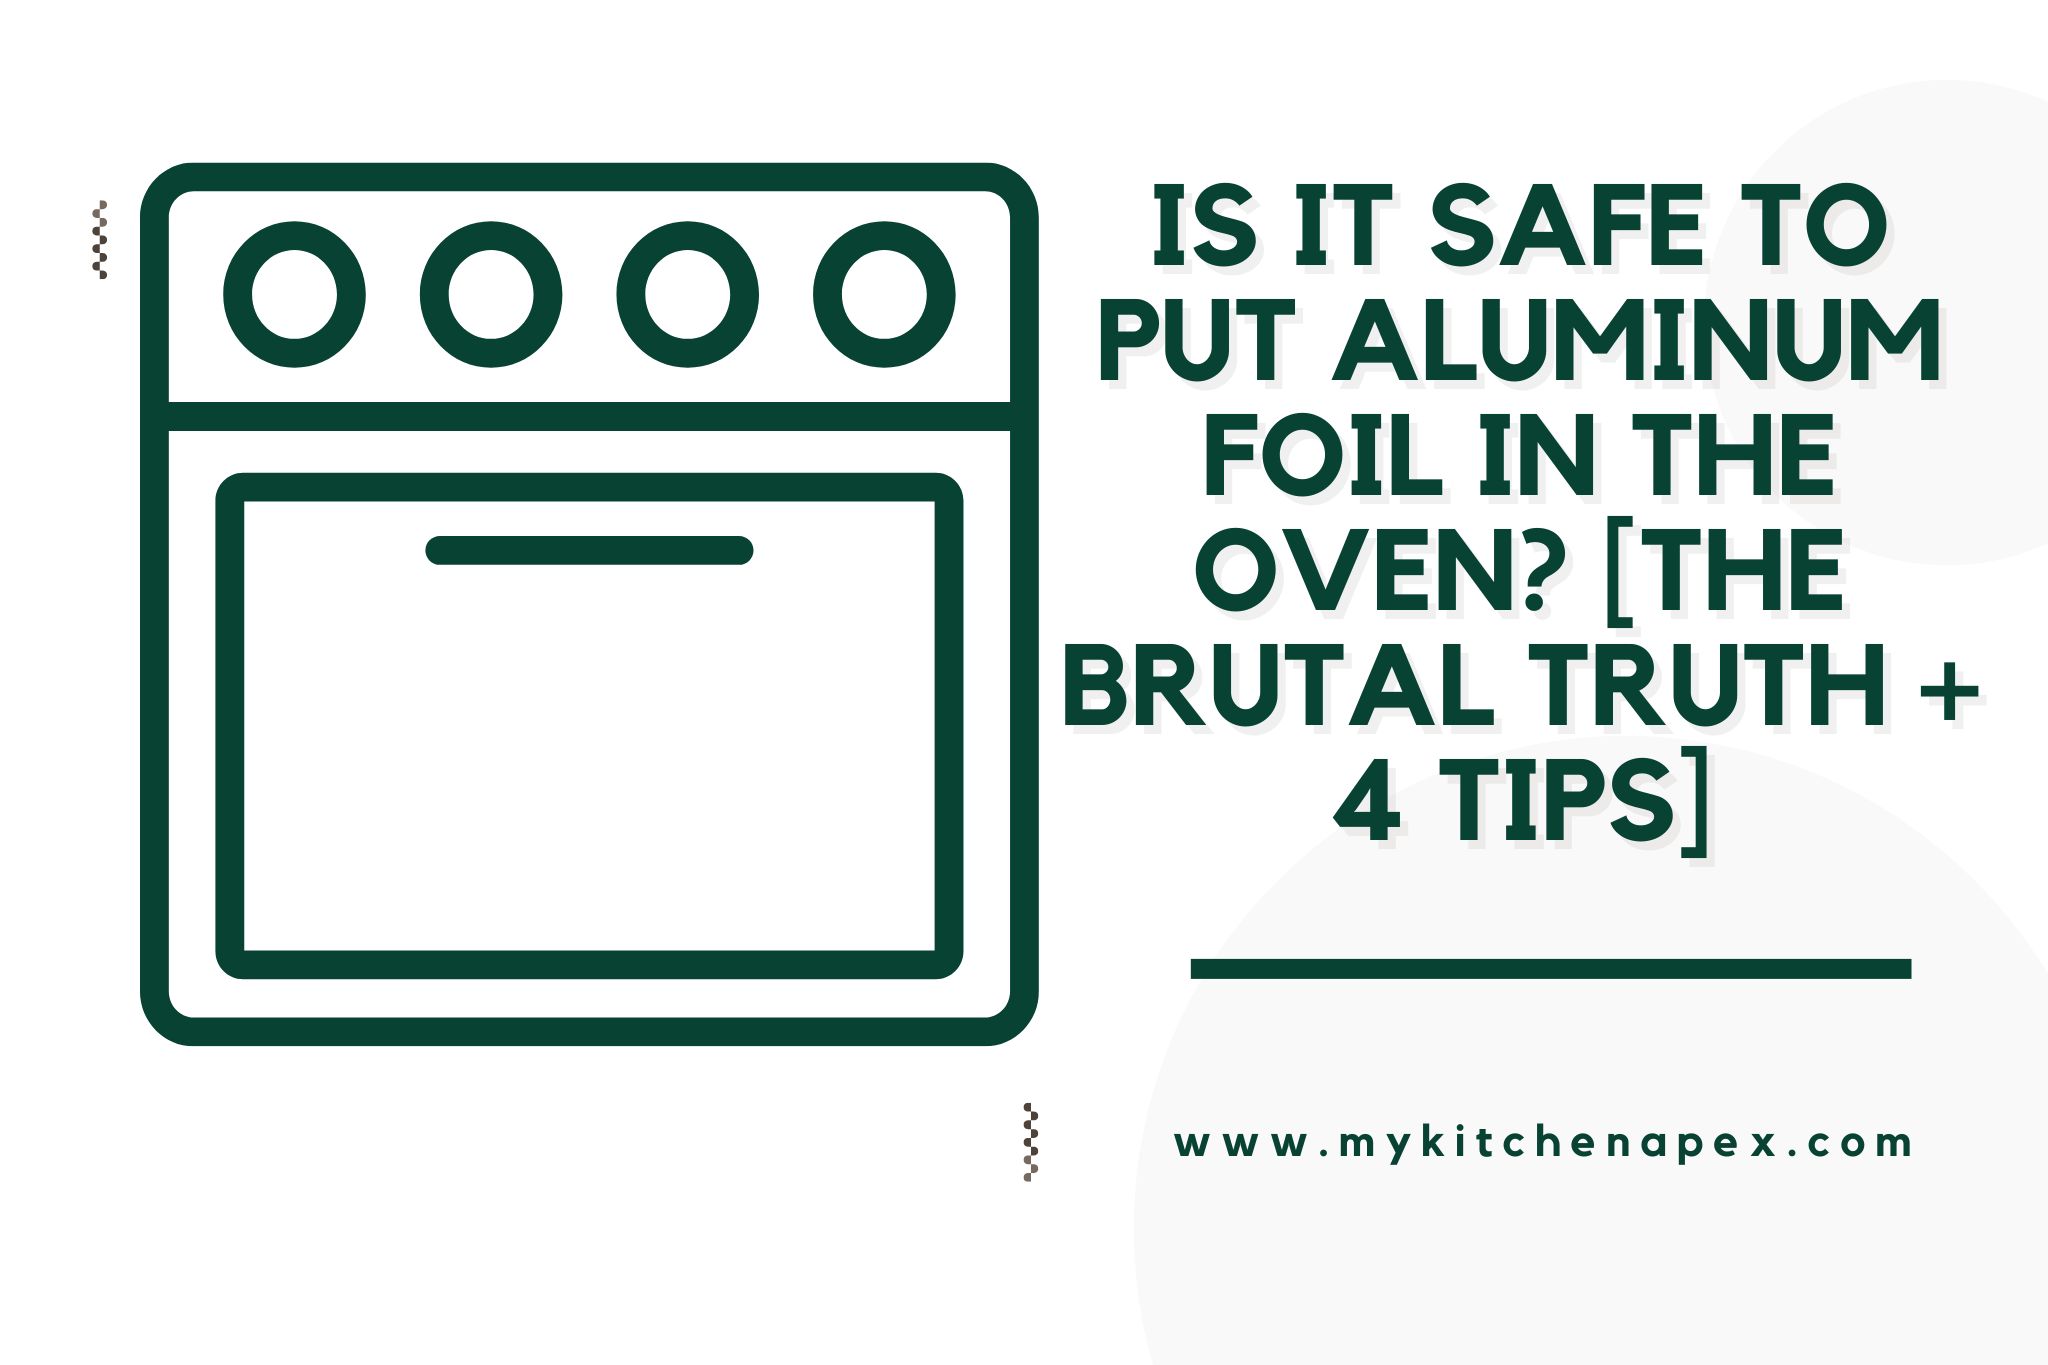 Is It Safe To Put Aluminum Foil In The Oven? [The Brutal TRUTH + 4 Tips]